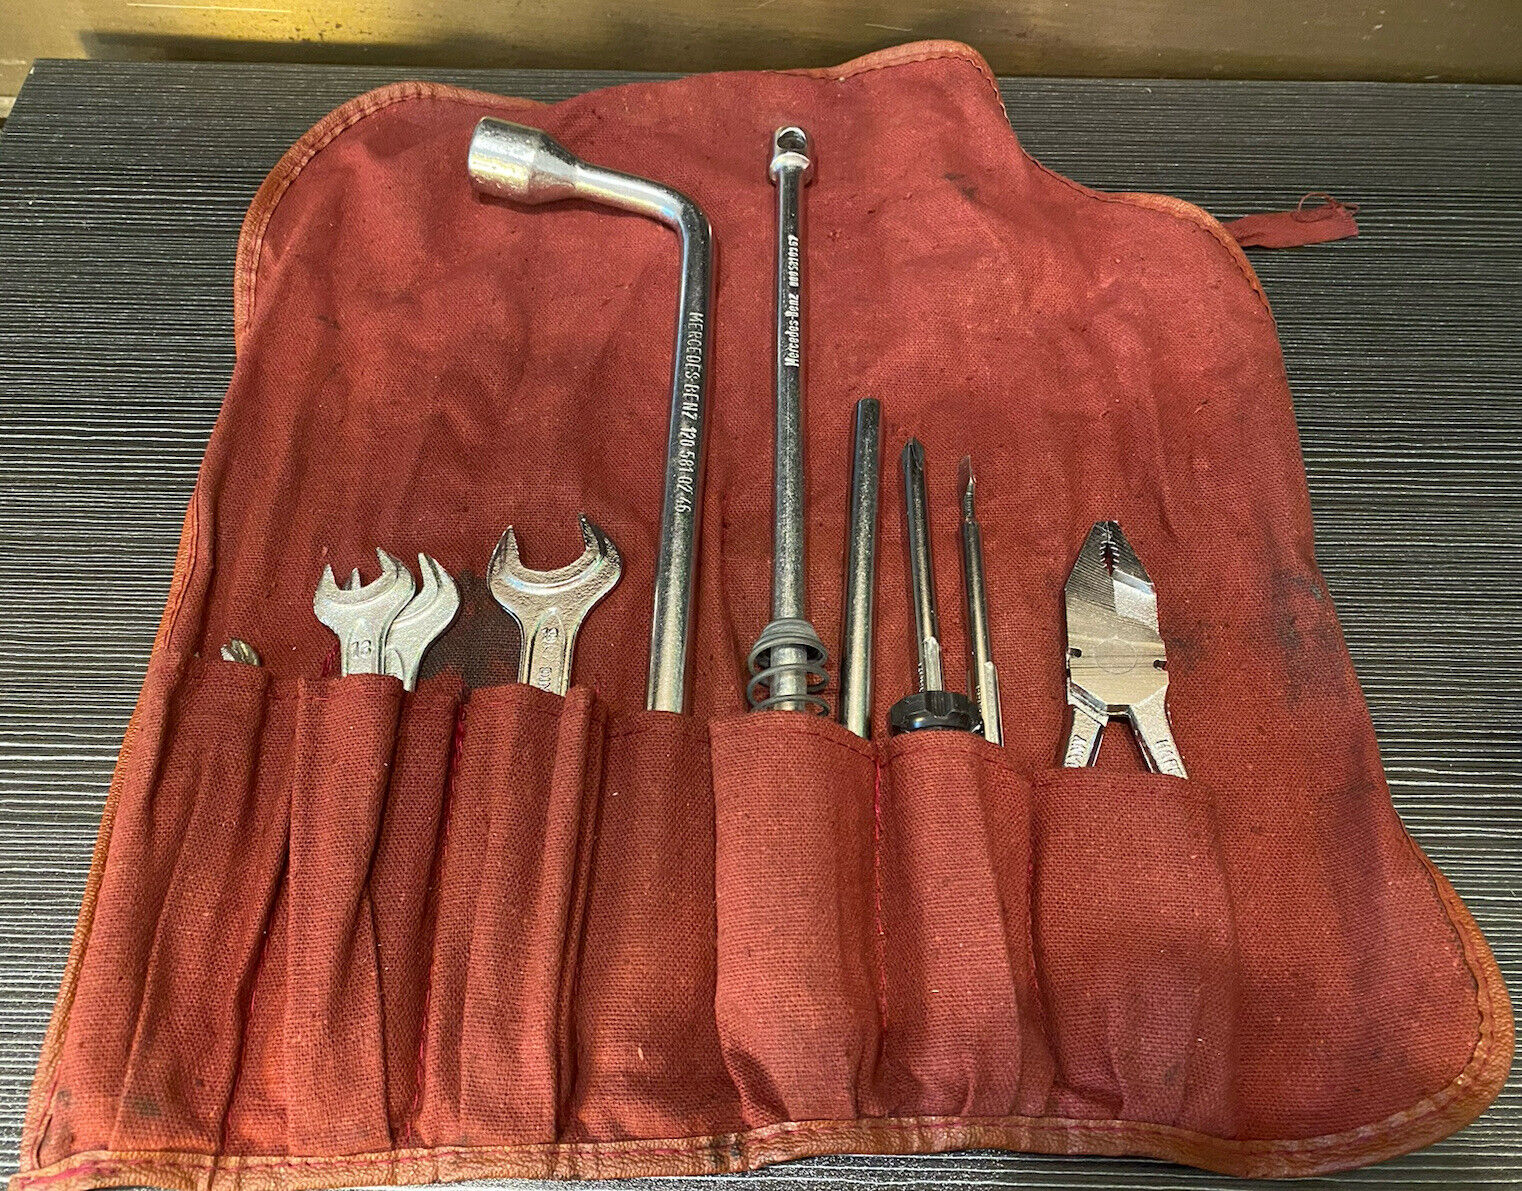 Vintage Mercedes-Benz Auto Mechanic Tools Made in Germany- Tire Iron, Wrenches